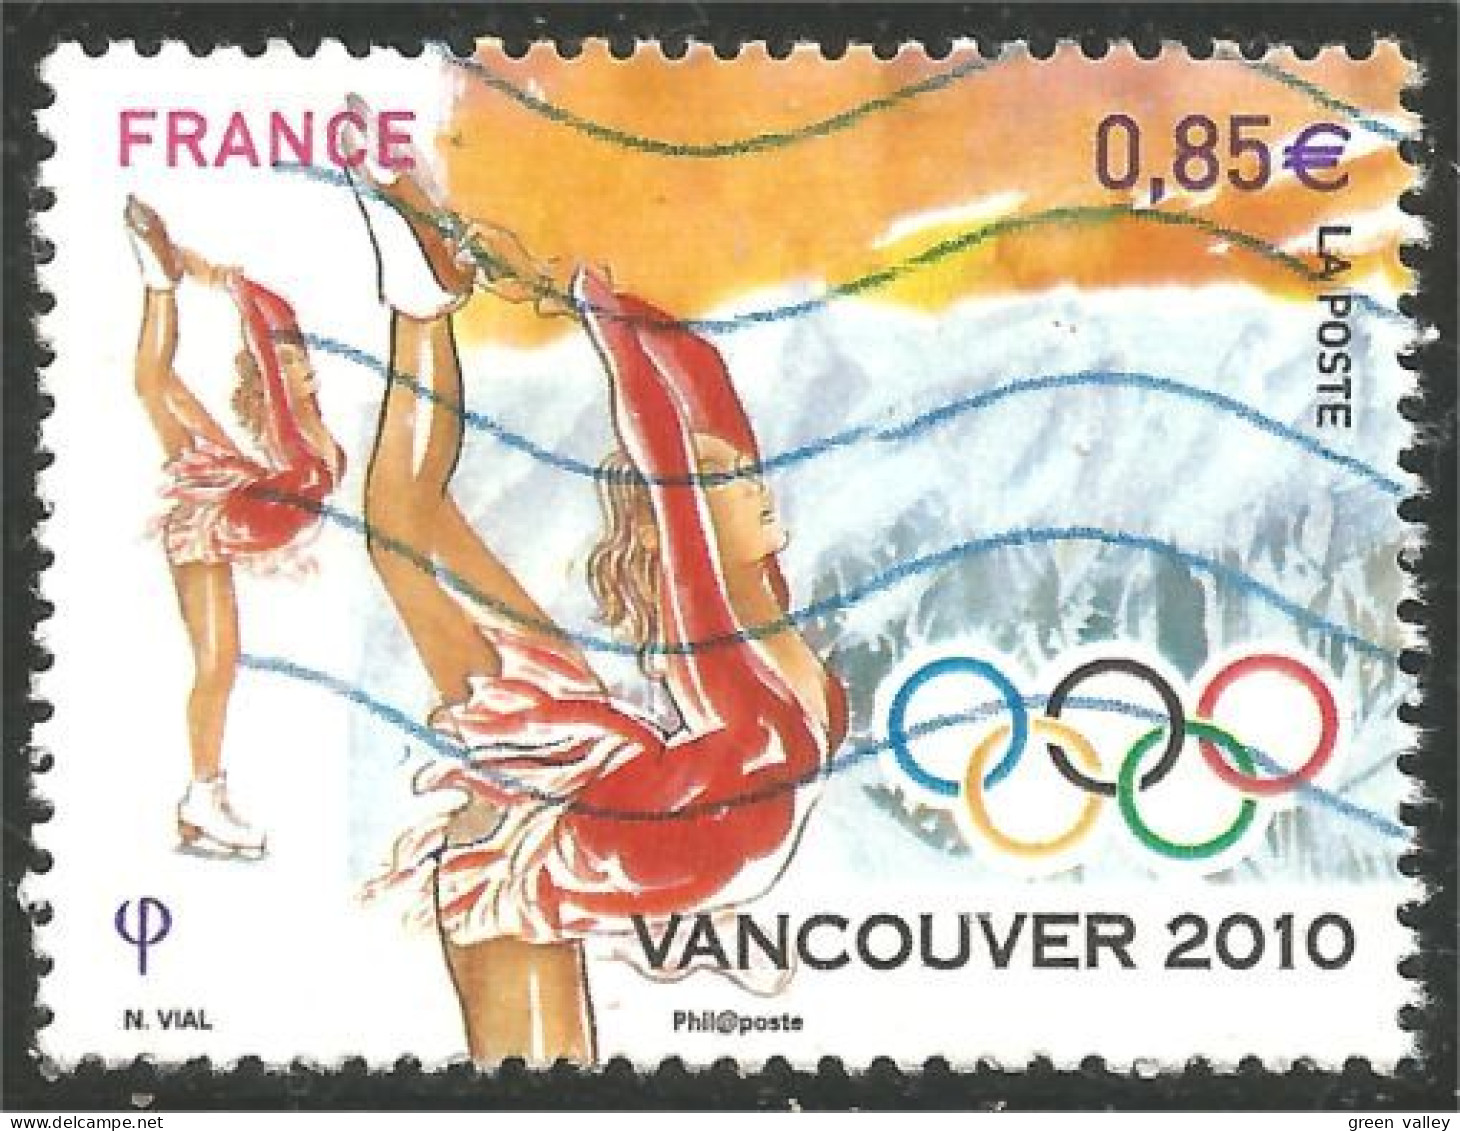 331eu-228 France Jeux Olympiques Vancouver Patinage Artistique Figure Skating Olympic Games - Pattinaggio Artistico